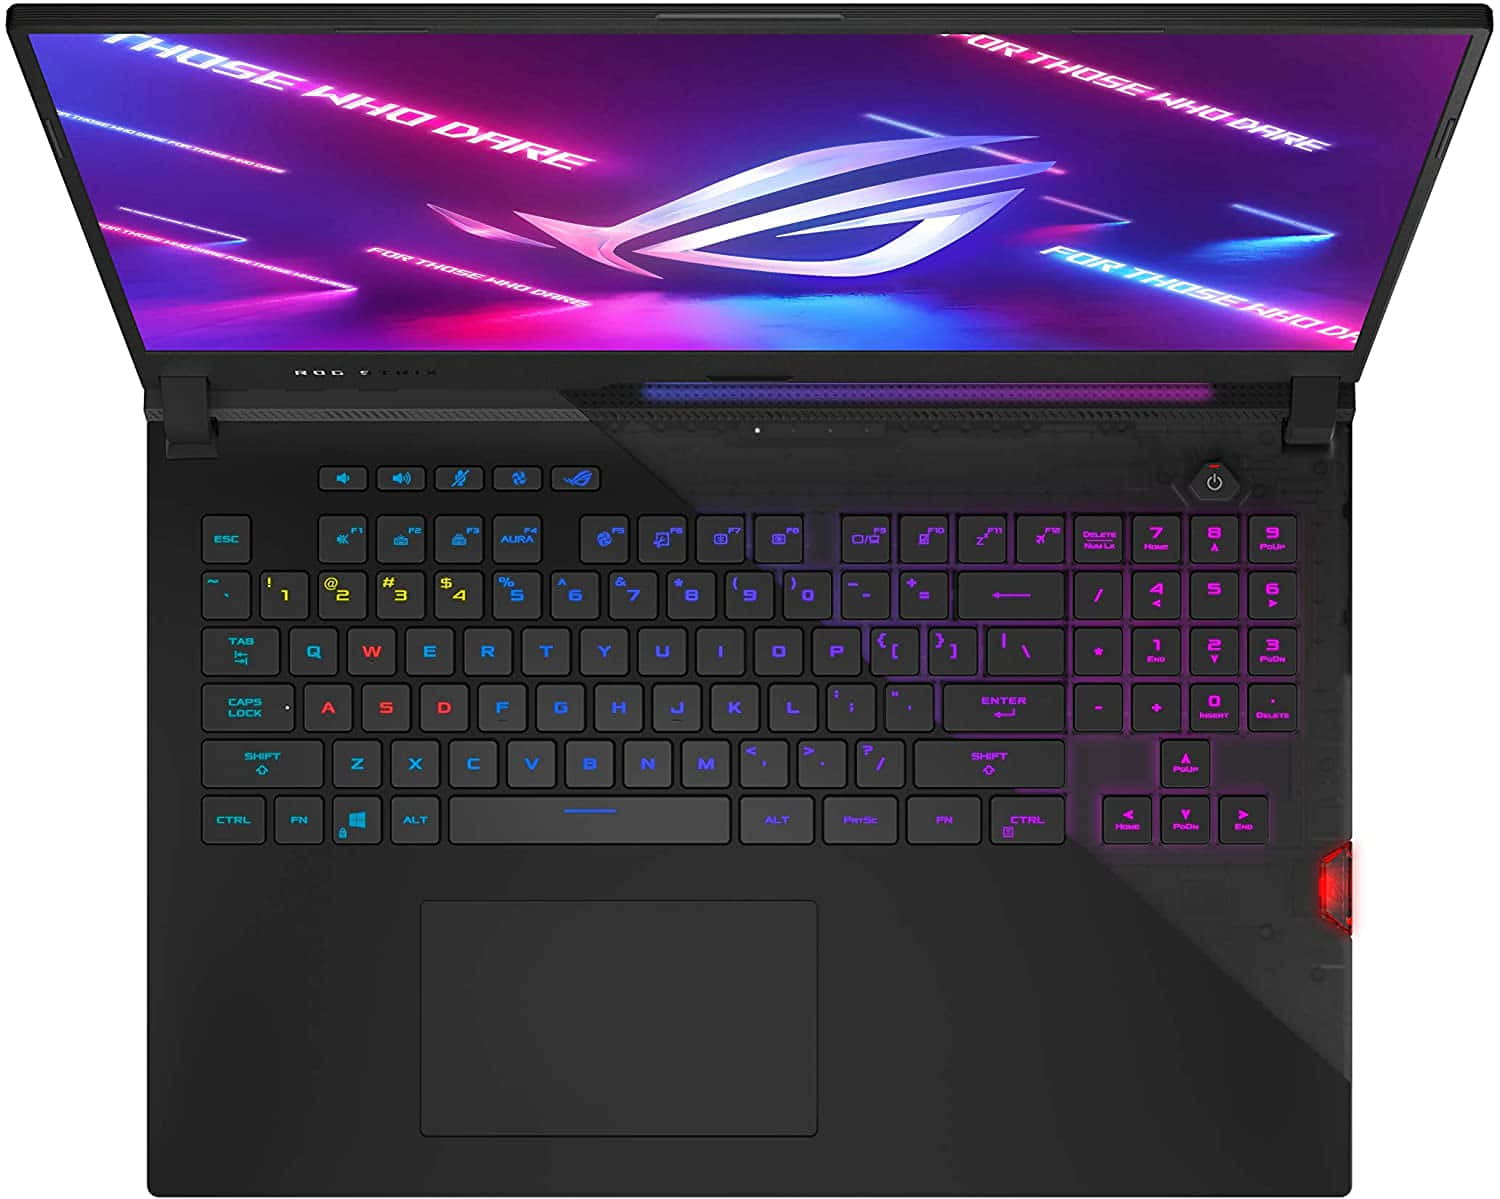 Asus Rog Pictures